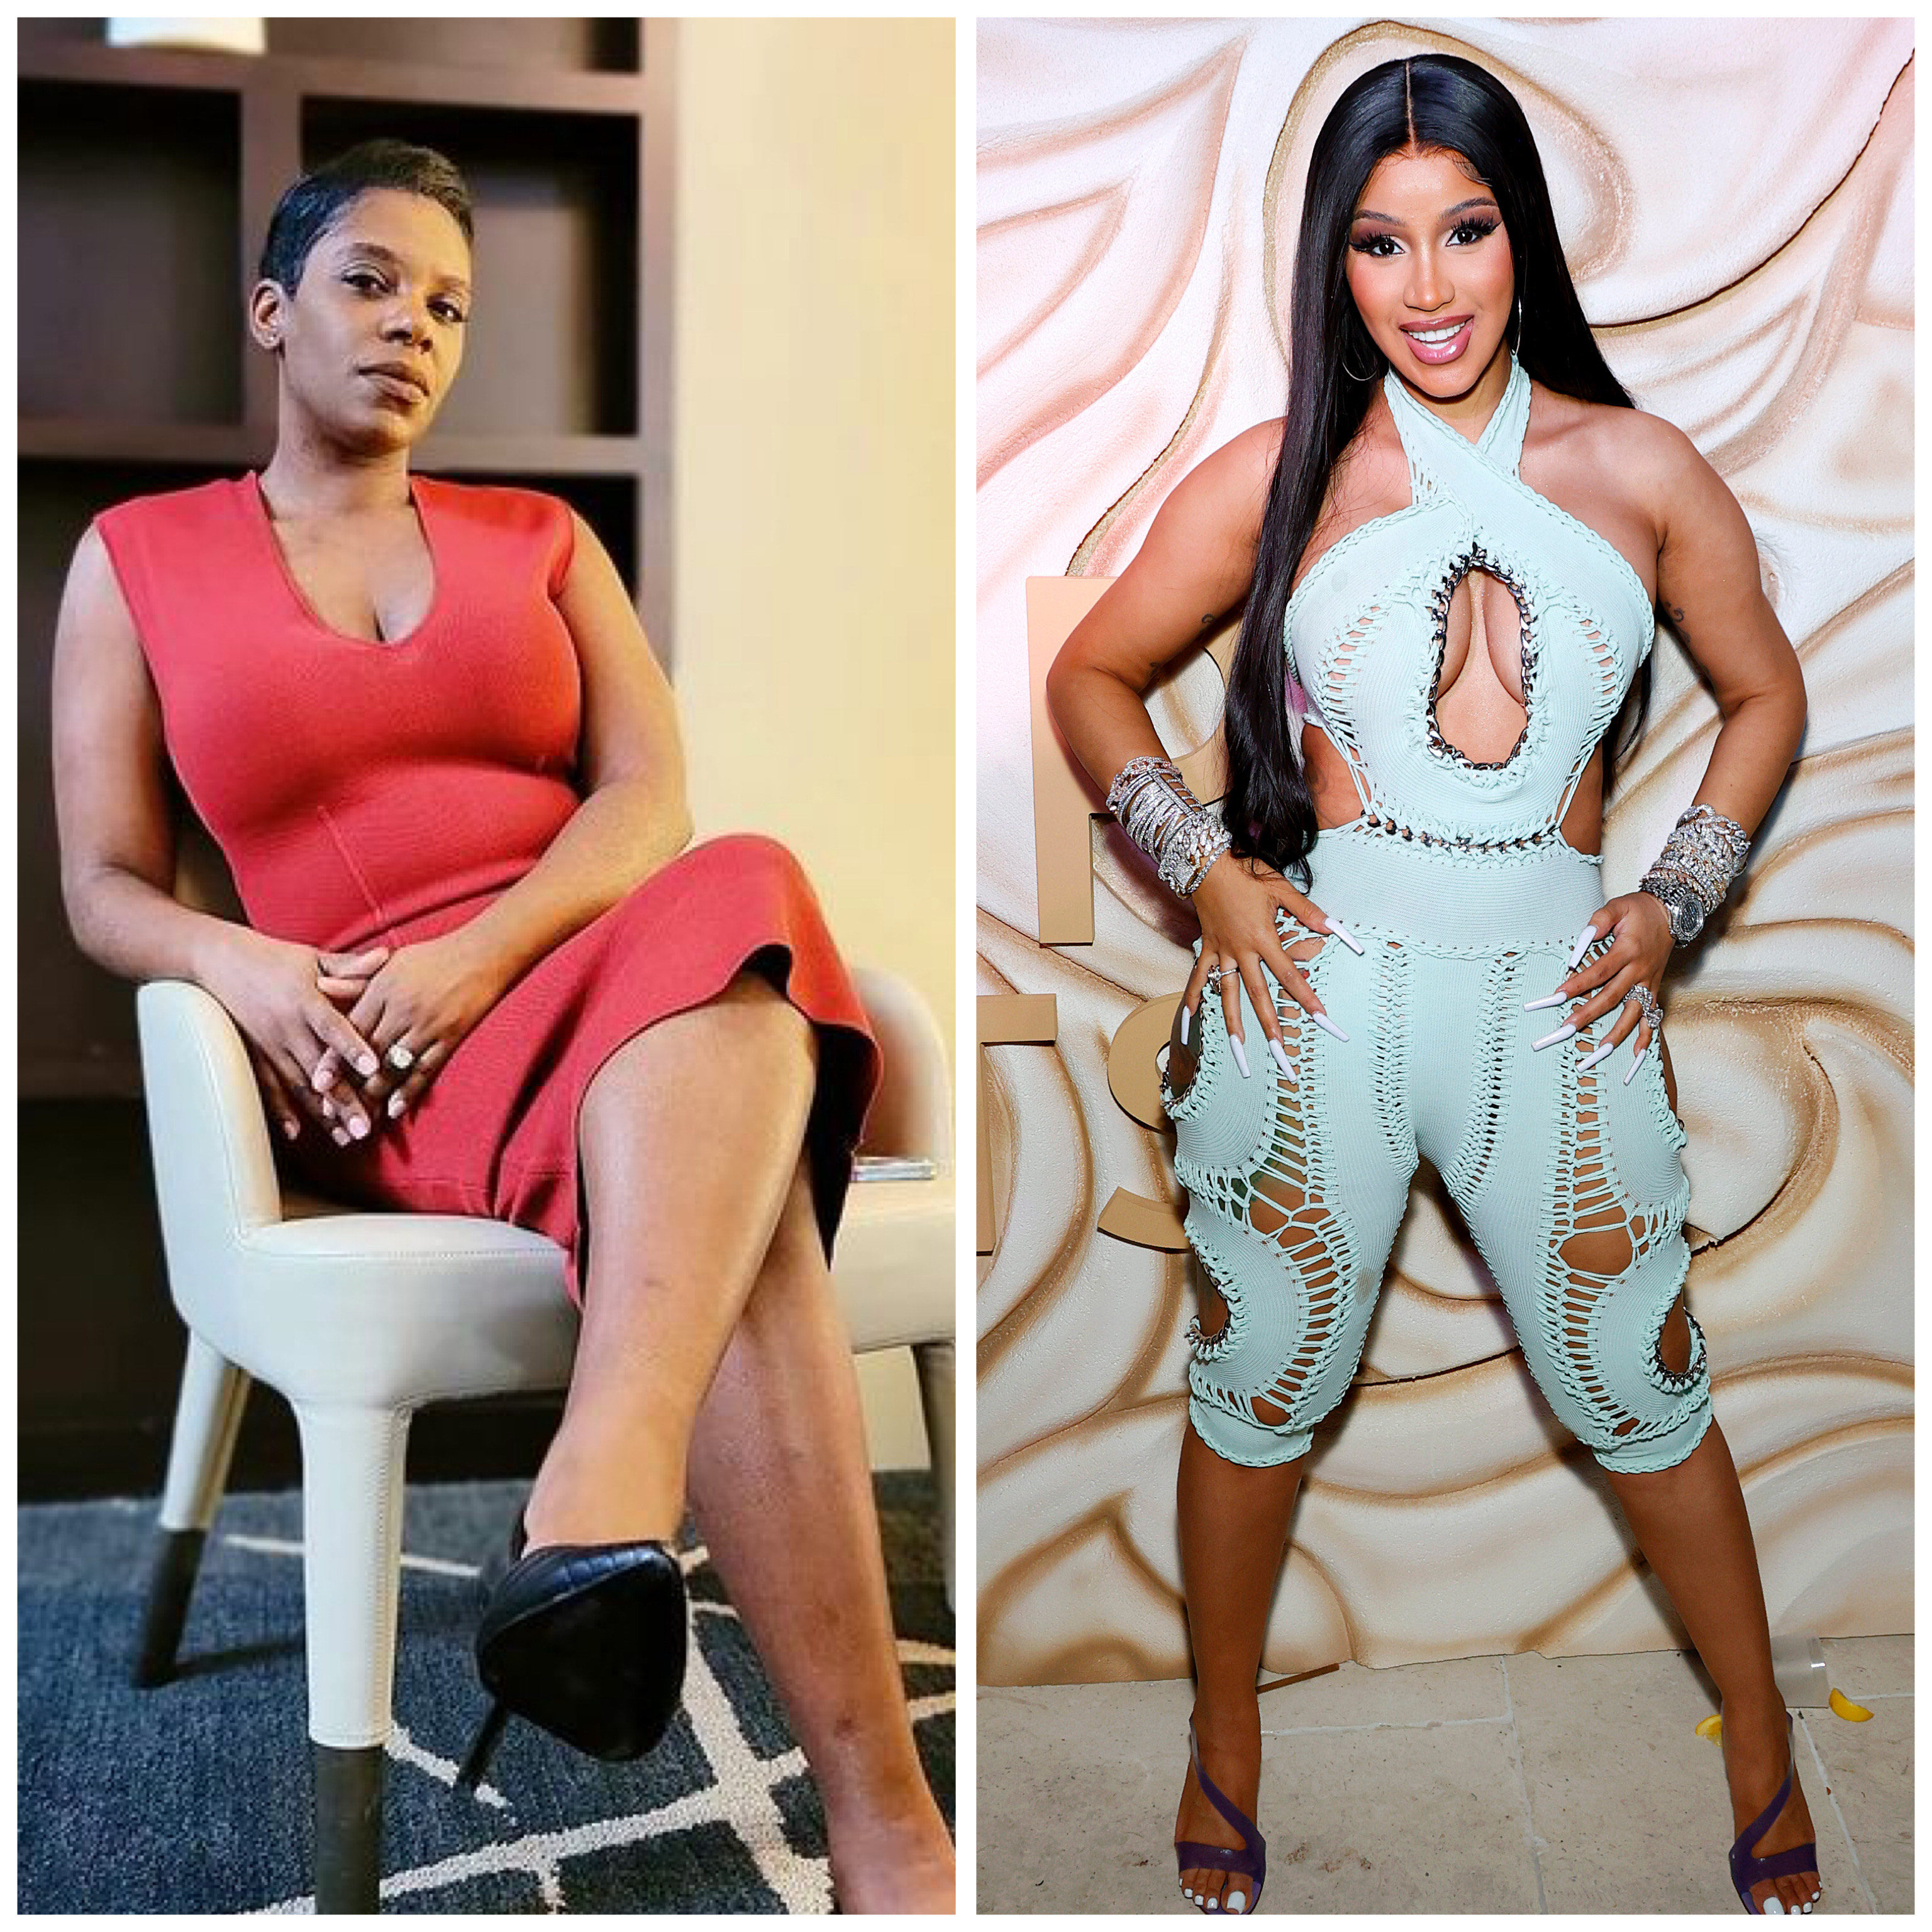 Photo of [VIDEO] Oop! Tasha K Says She “Ain’t Got It” When Asked If She Was Going To Pay Cardi B Over $3M As Judge Ordered